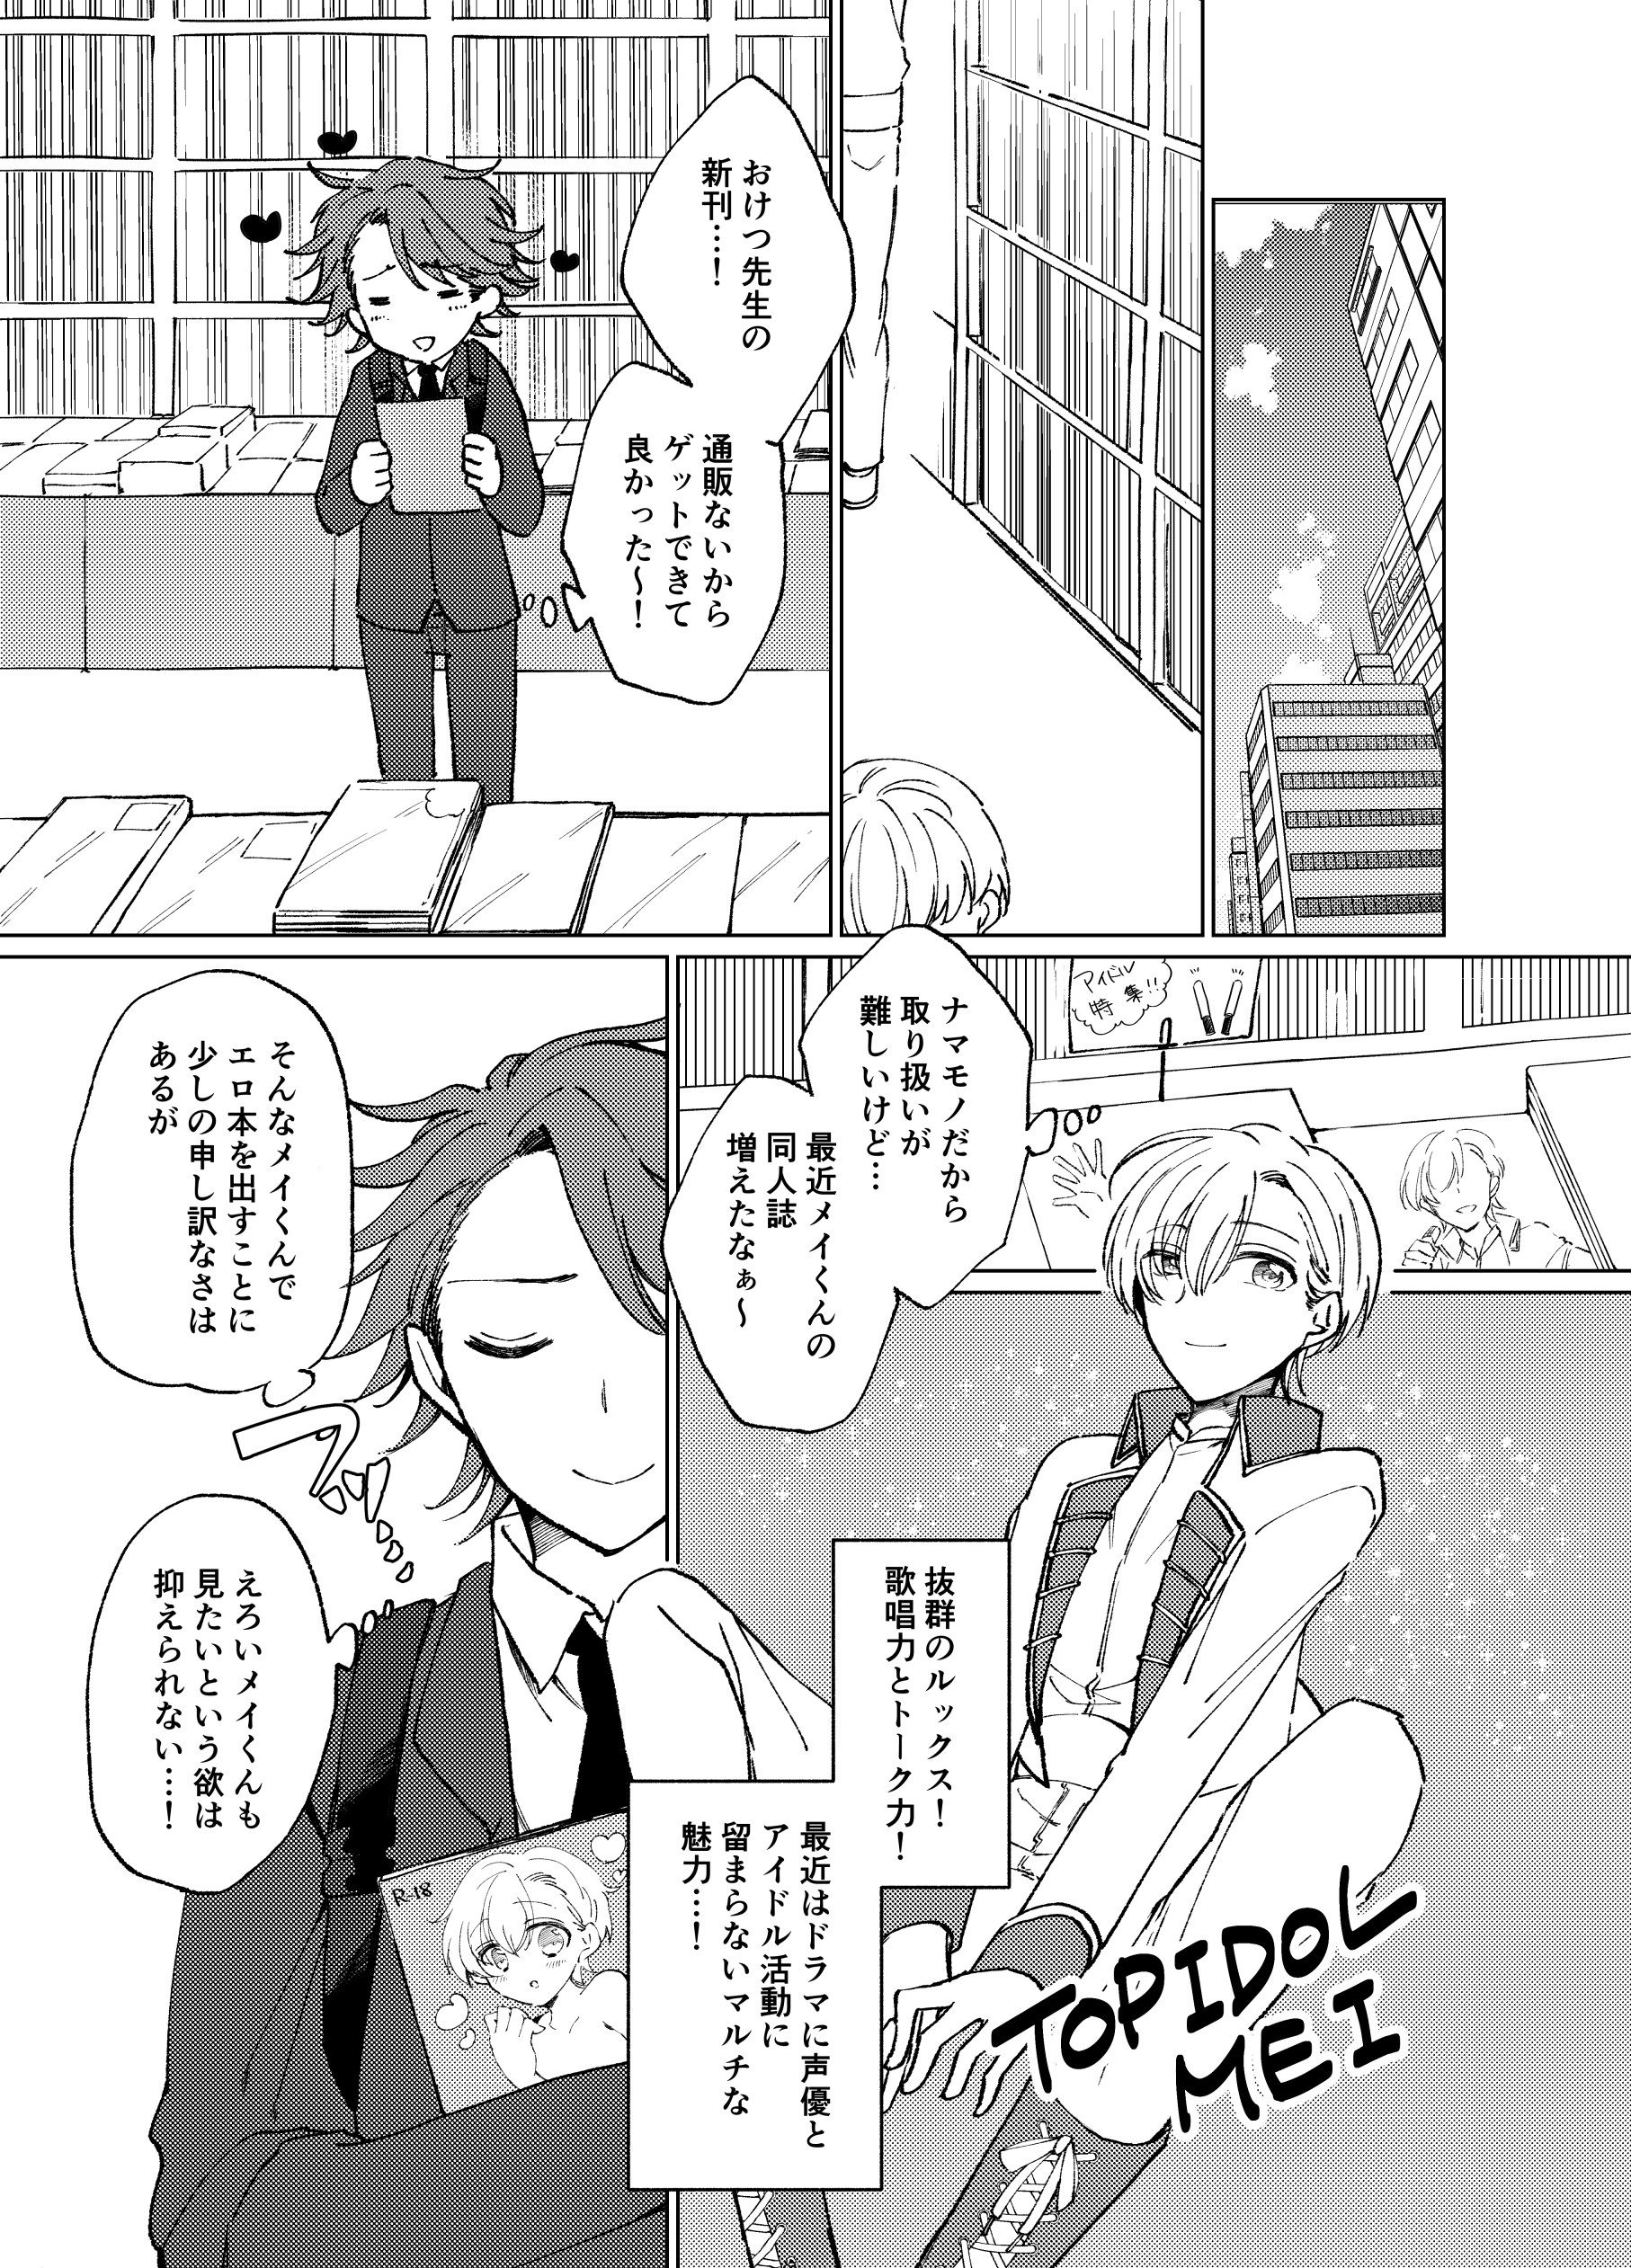 acca＠最弱令嬢連載中 (@acca_works) / Twitter